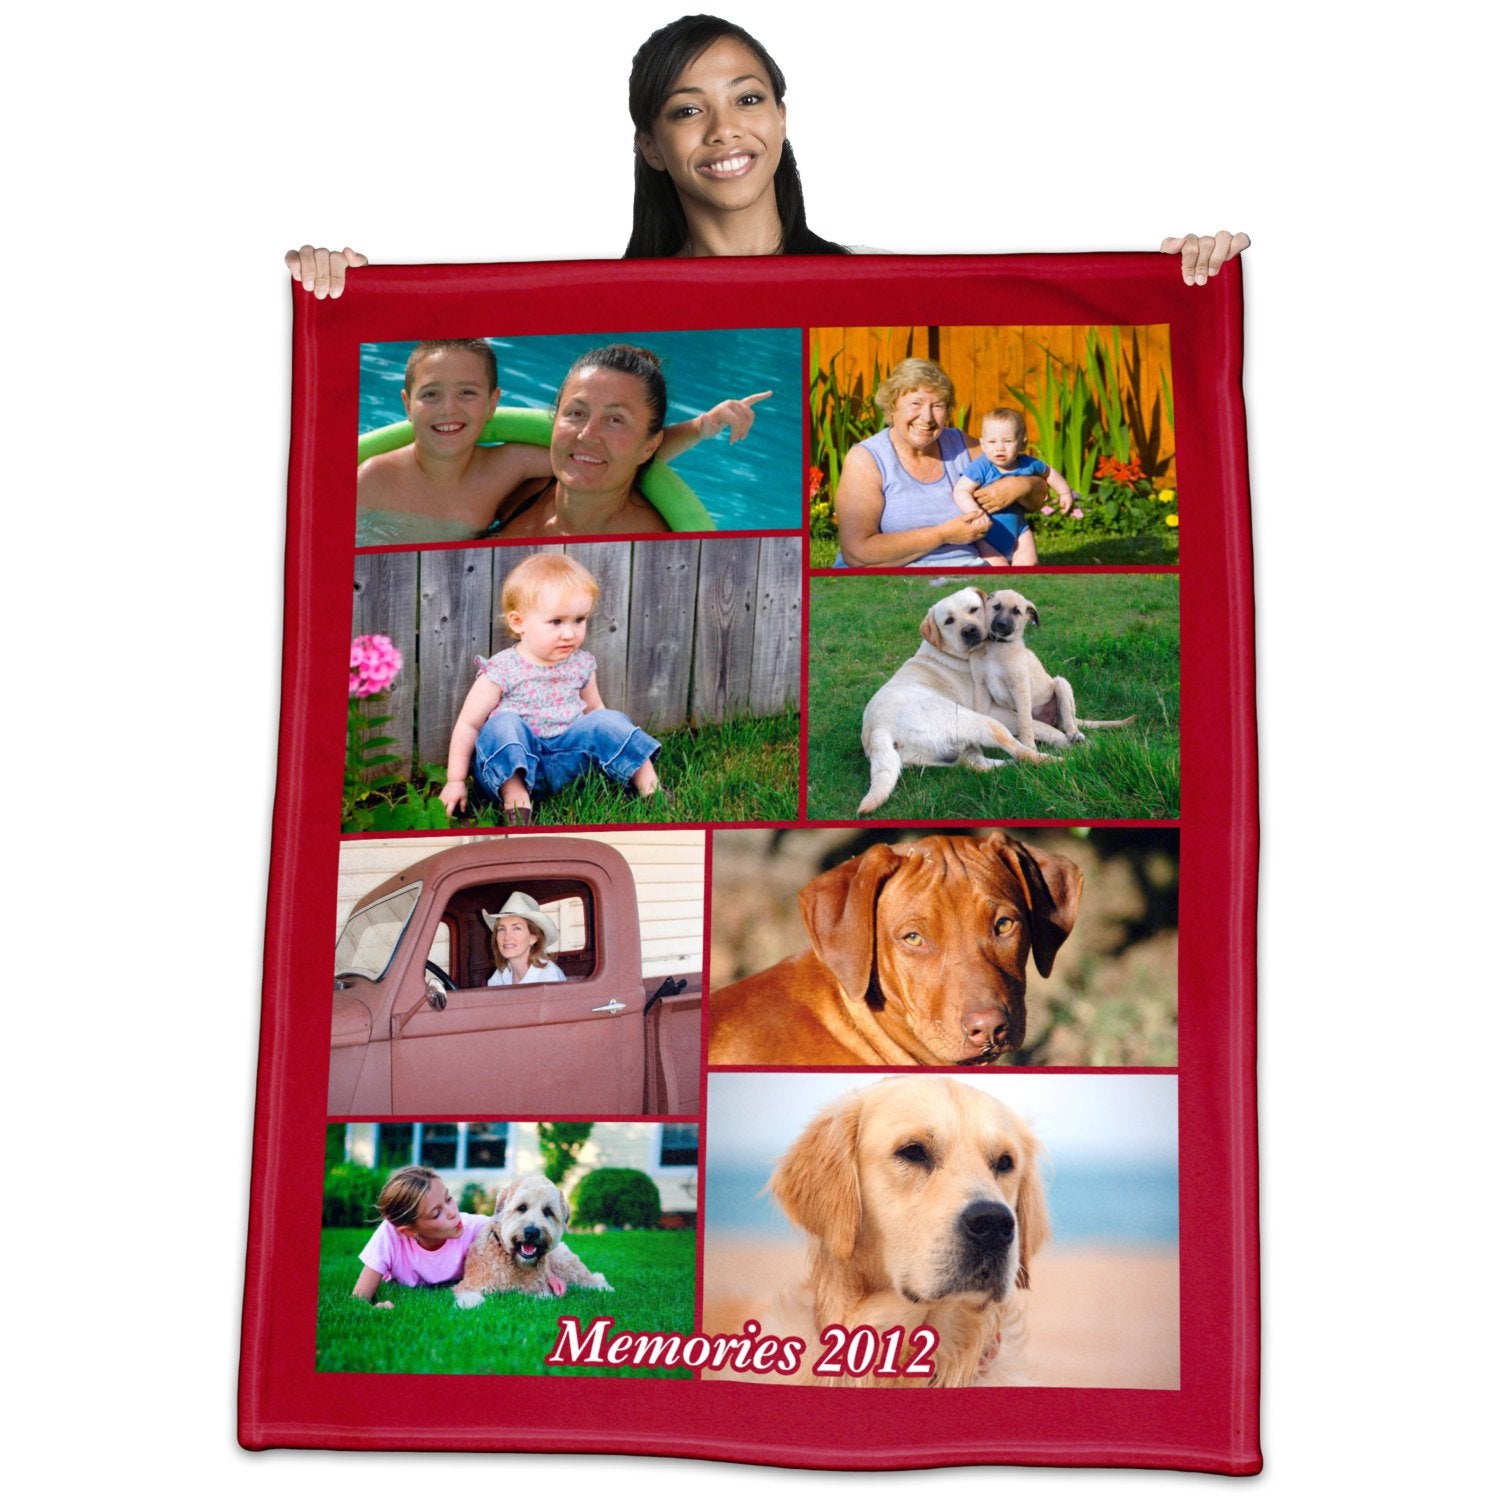 Personalized Polar Fleece Collage Photo Throw Blanket / Tapestry Wall Hanging